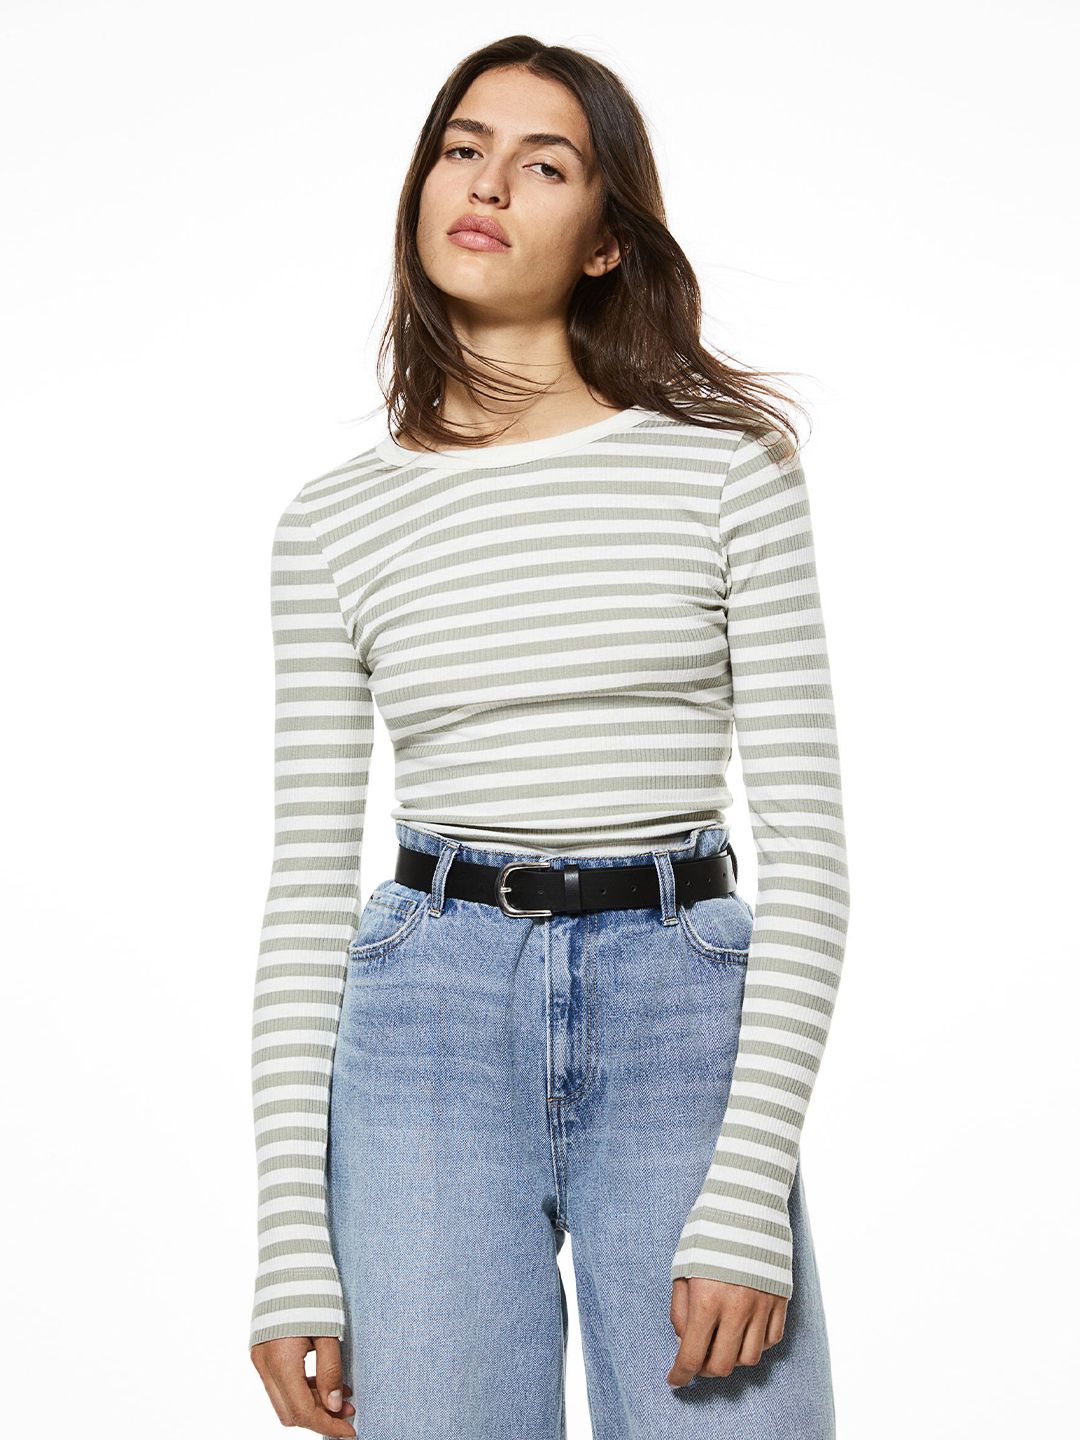 H&M Striped Ribbed Top Price in India